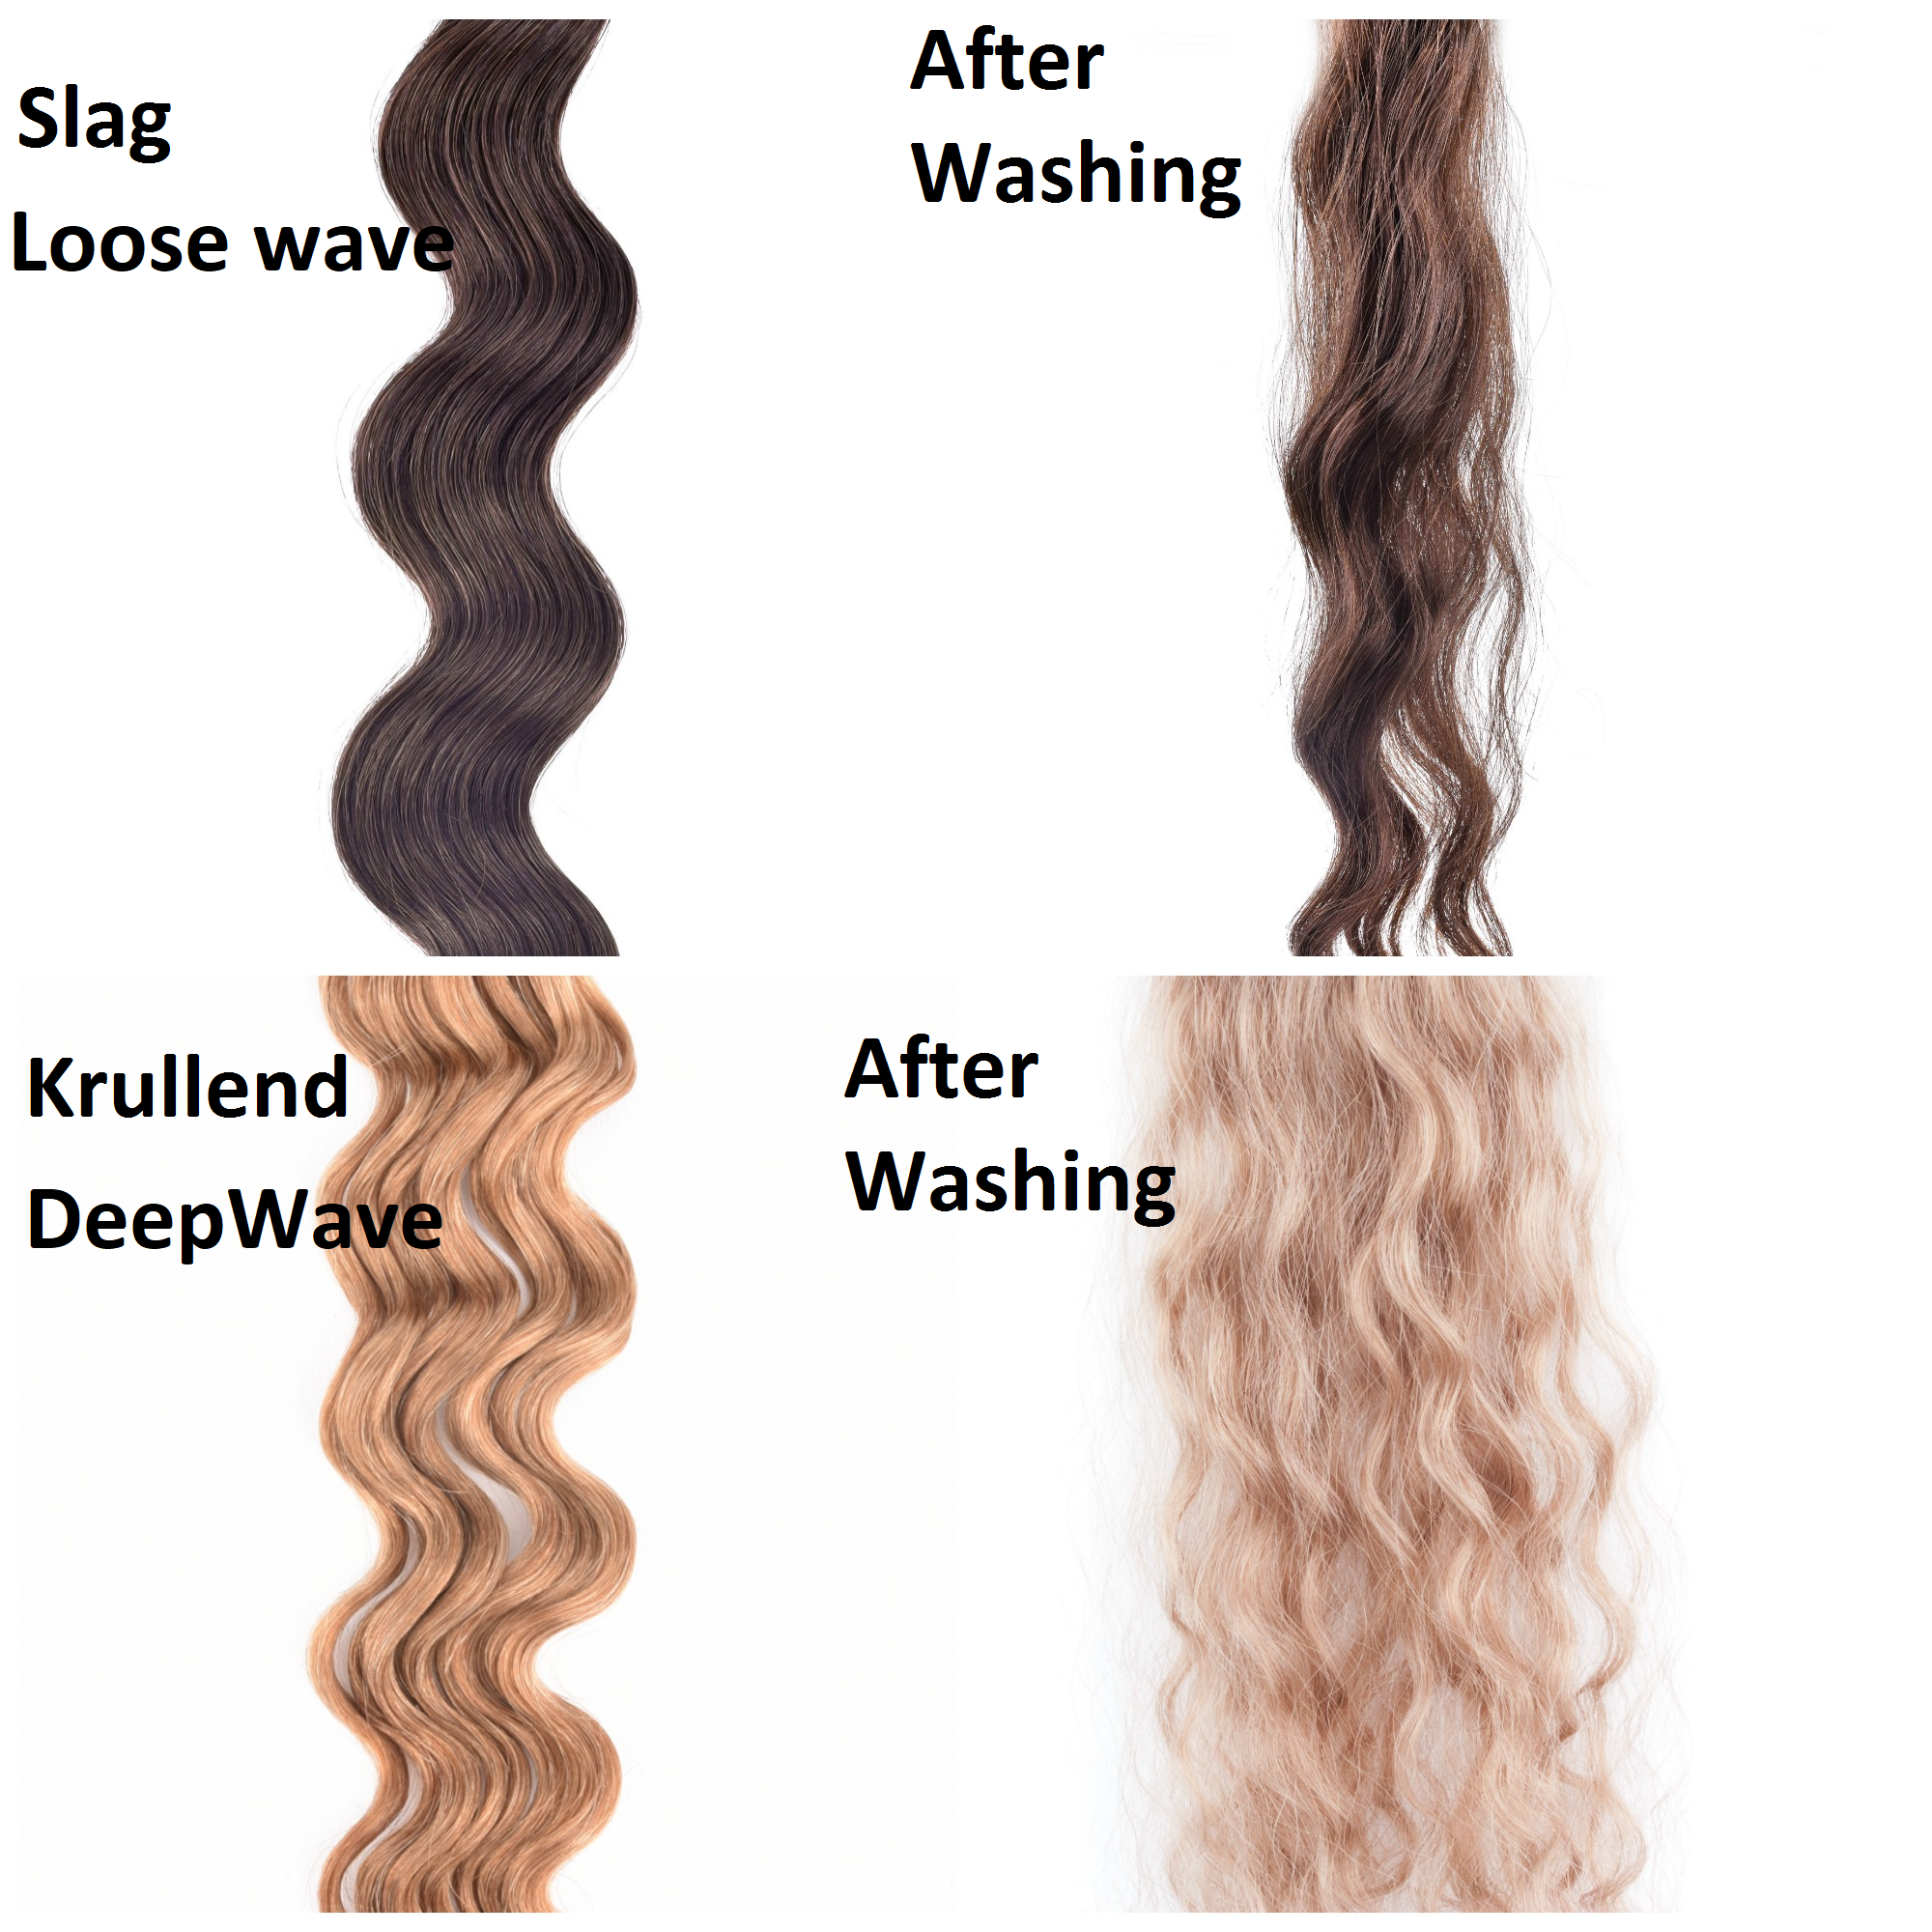 SilverFox Wax Extensions Loose Wave 55cm #22 Hollywood Blonde